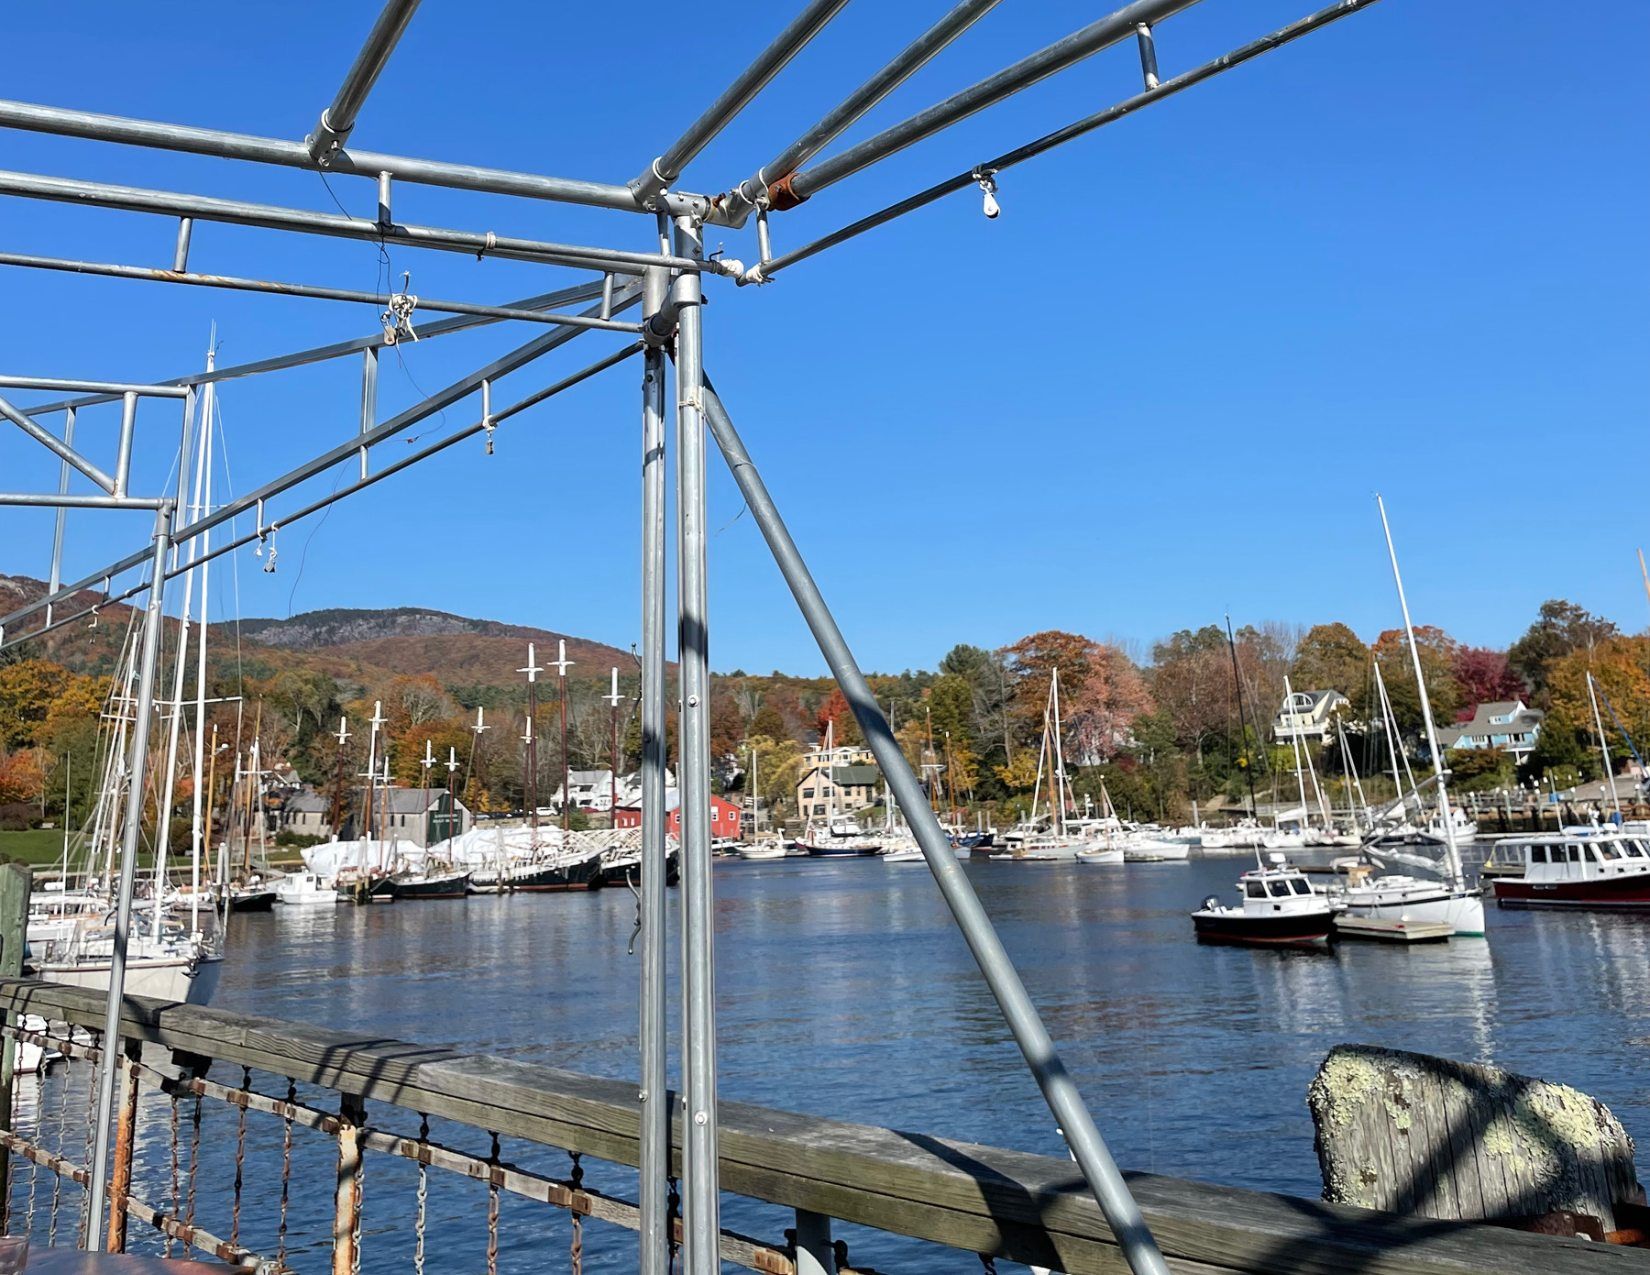 View of boats docked in a marina in Camden, Maine with fall trees surrounding the water